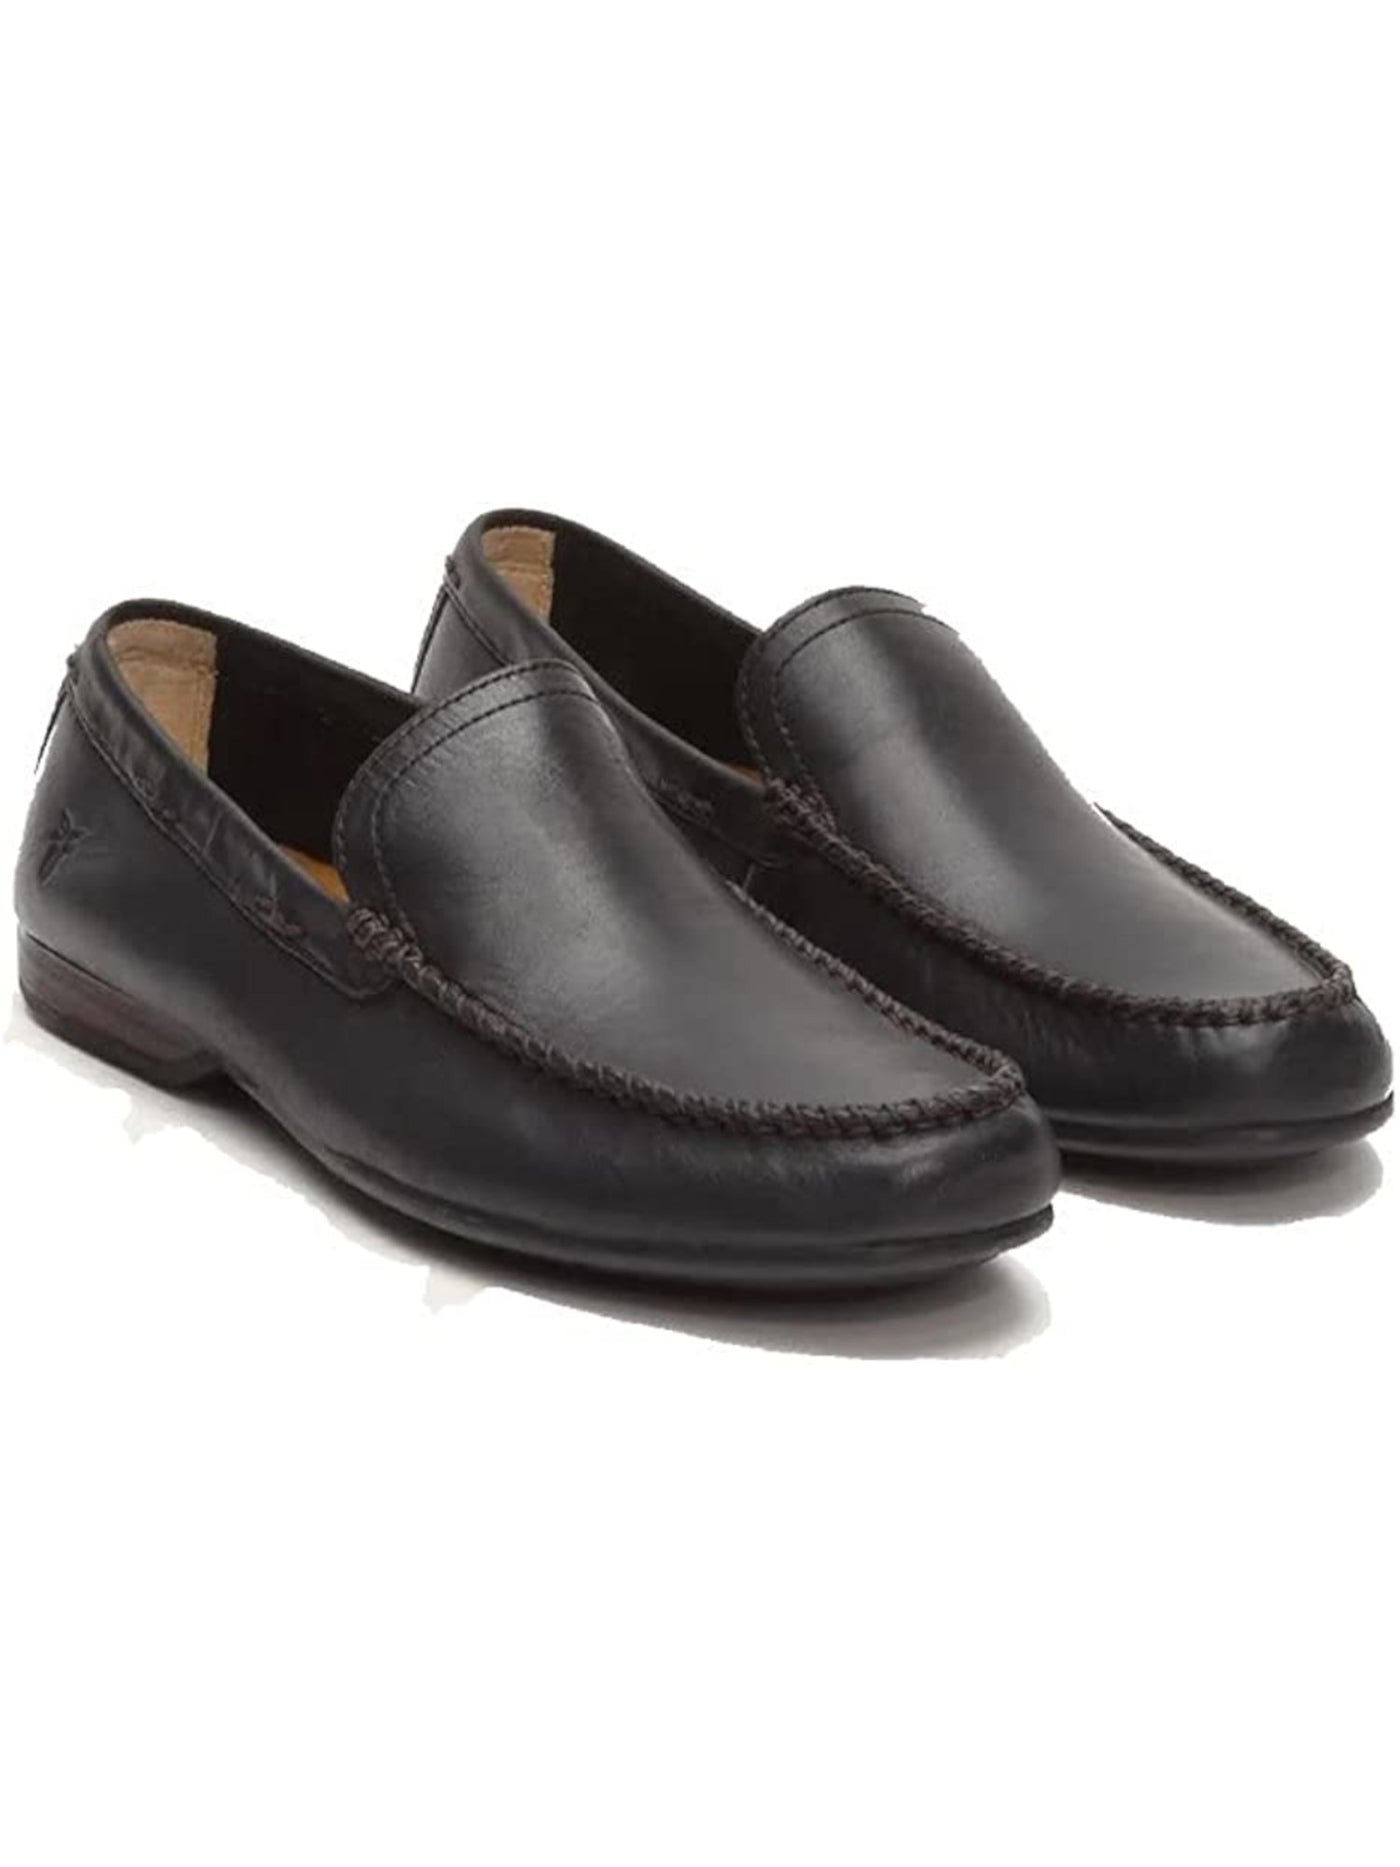 FRYE Mens Black Comfort Lewis Venetian Round Toe Slip On Leather Loafers Shoes 9.5